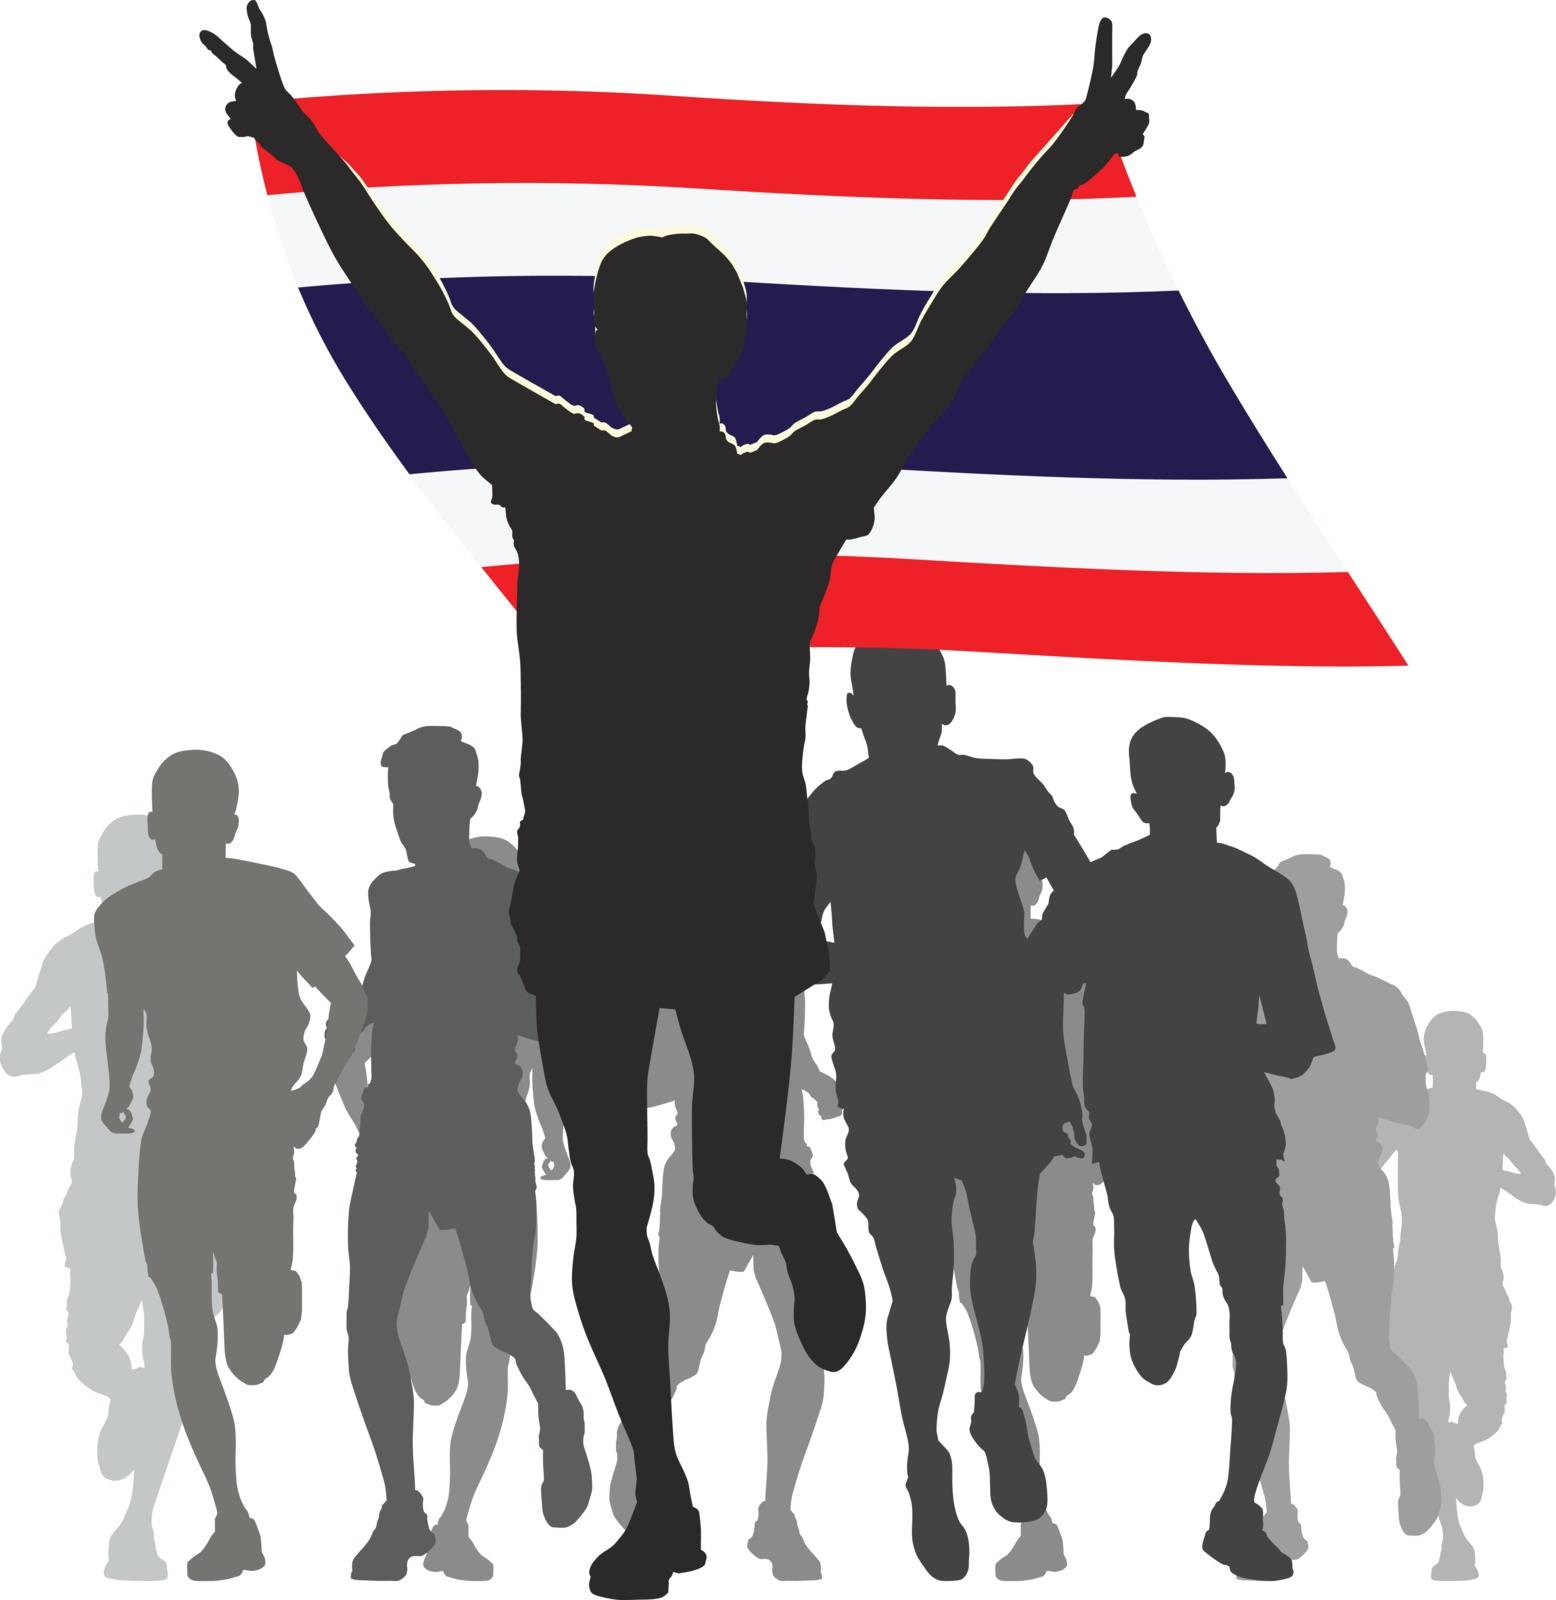 Illustration silhouettes of athletes, runners at the finish, winner holding Thailand flag overhead